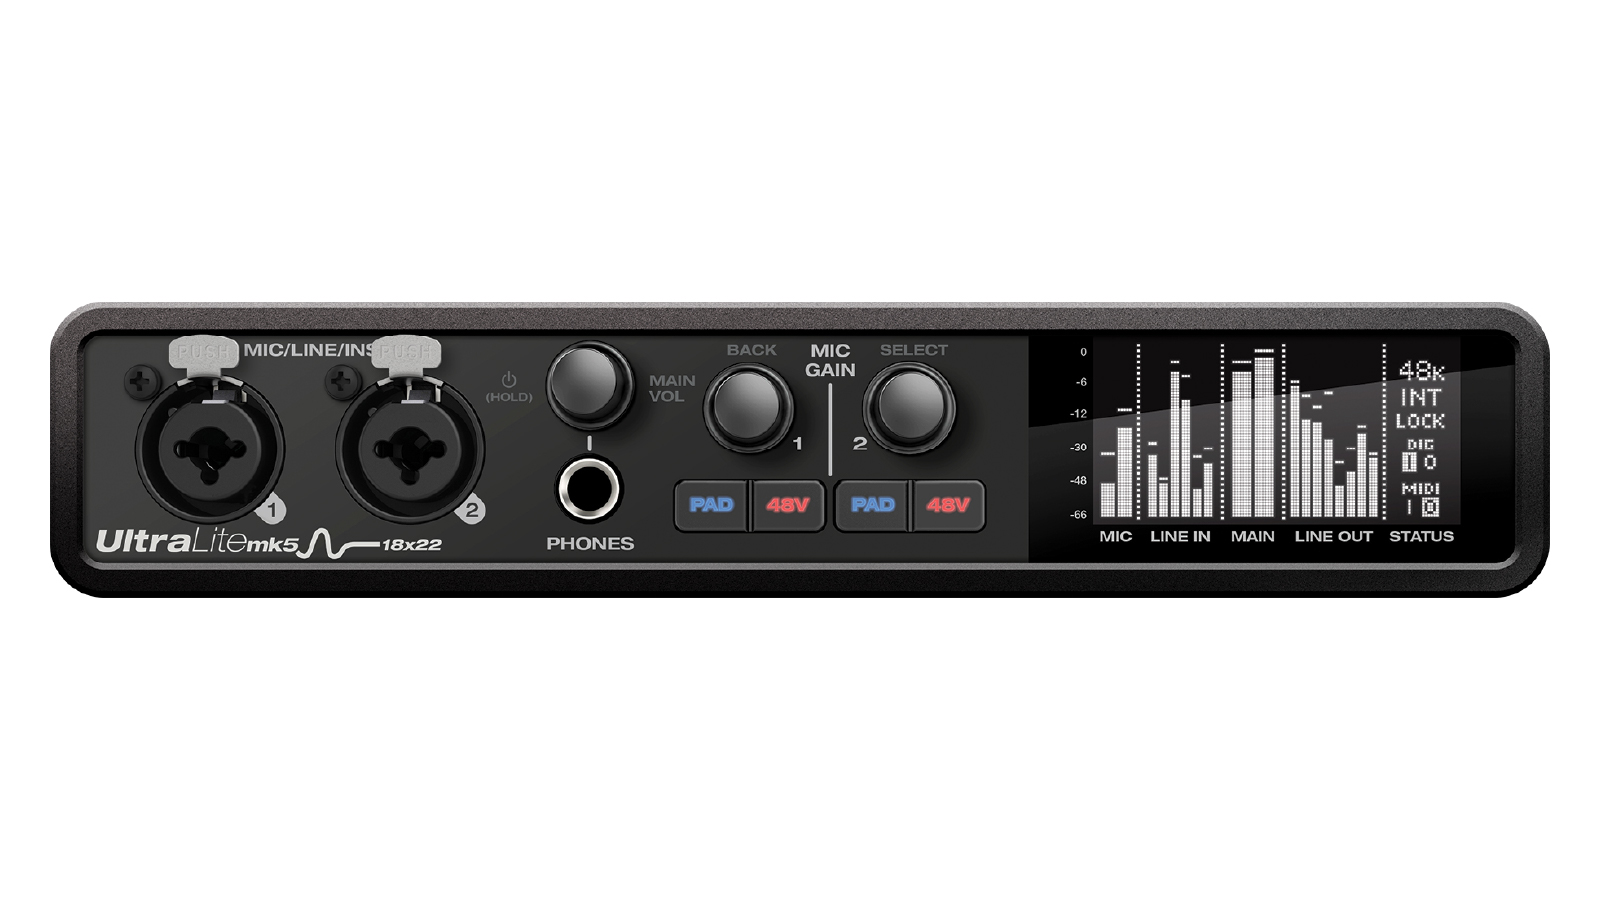 18x22 USB audio interface with DSP, mixing and effects